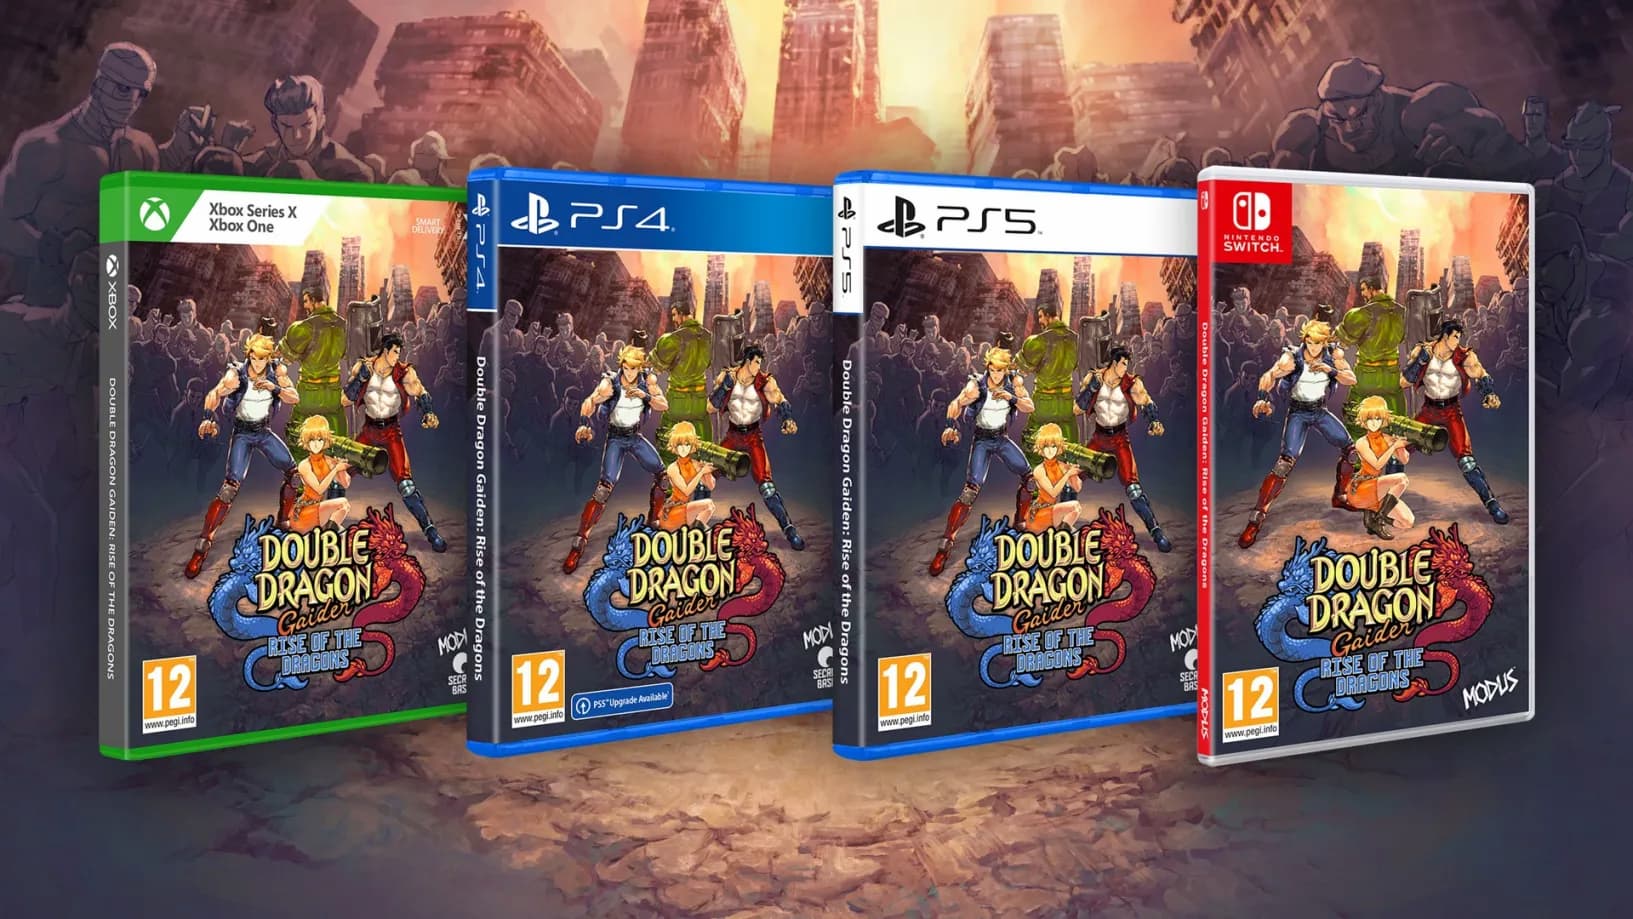 Double Dragon Gaiden Rise Of The Dragons Ps4 Midia Fisica